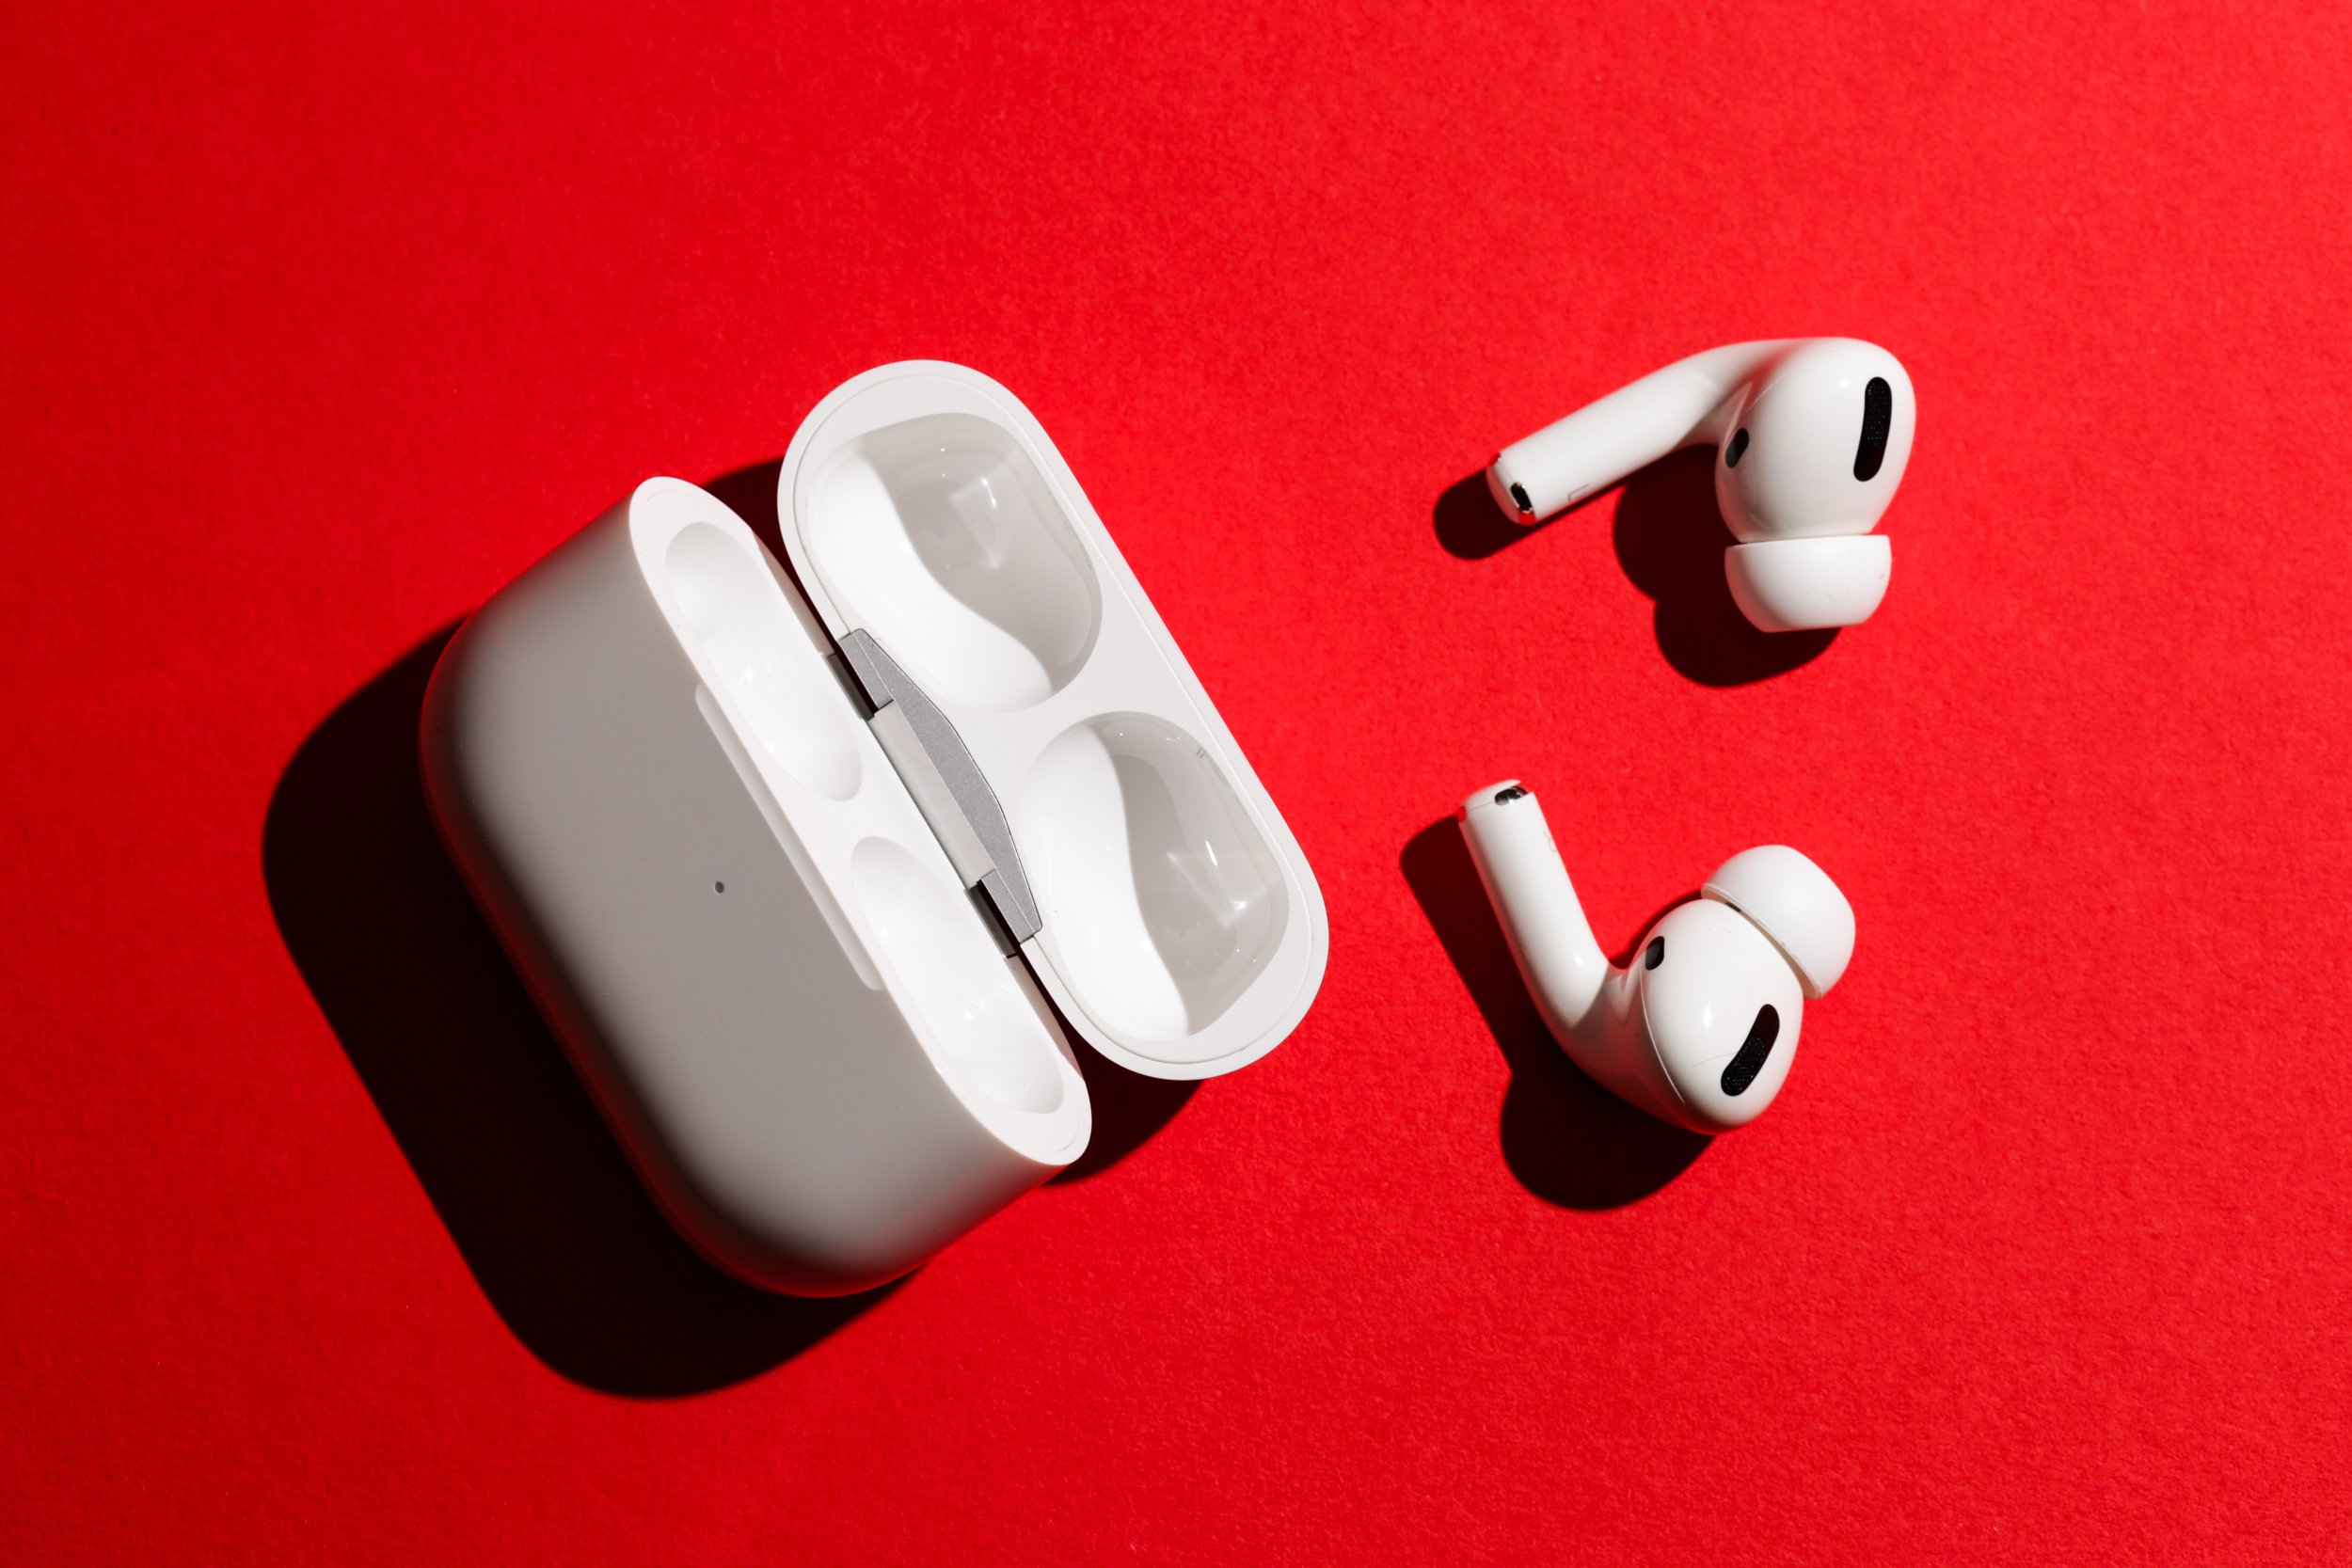 How to connect AirPods to a PS4 for wireless audio listening